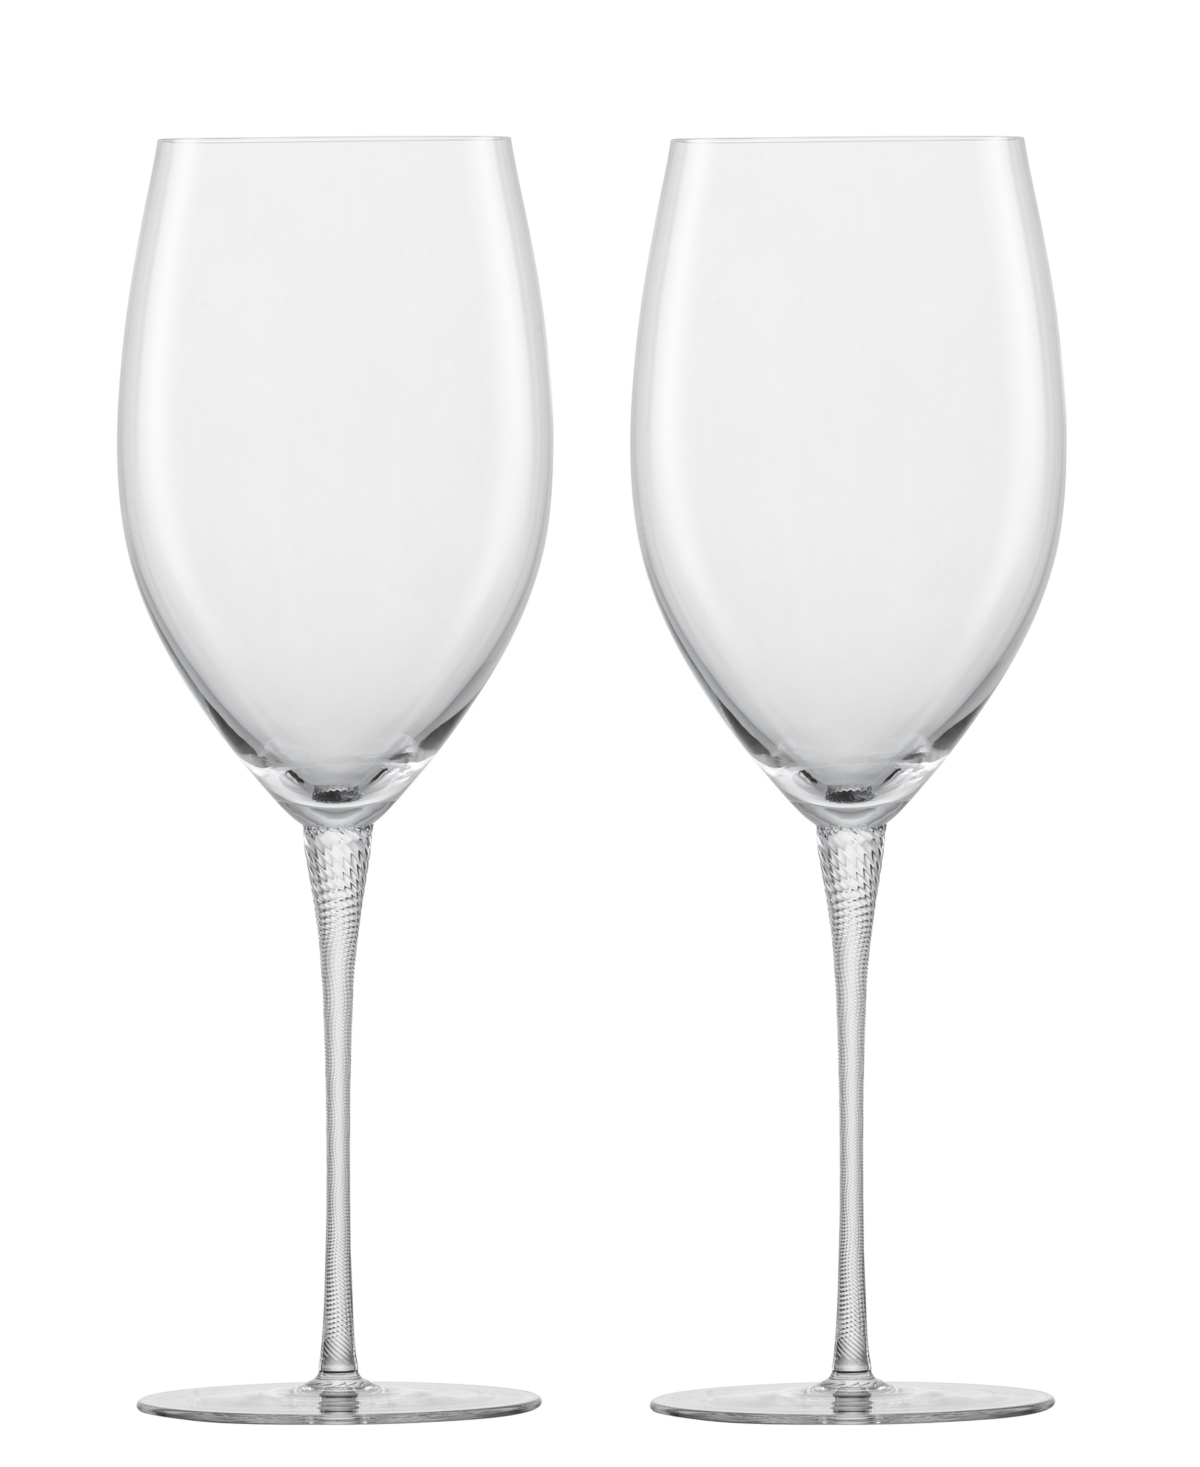 Zwiesel Glas Handmade Highness Bordeaux 21.2 Oz, Set Of 2 In Clear